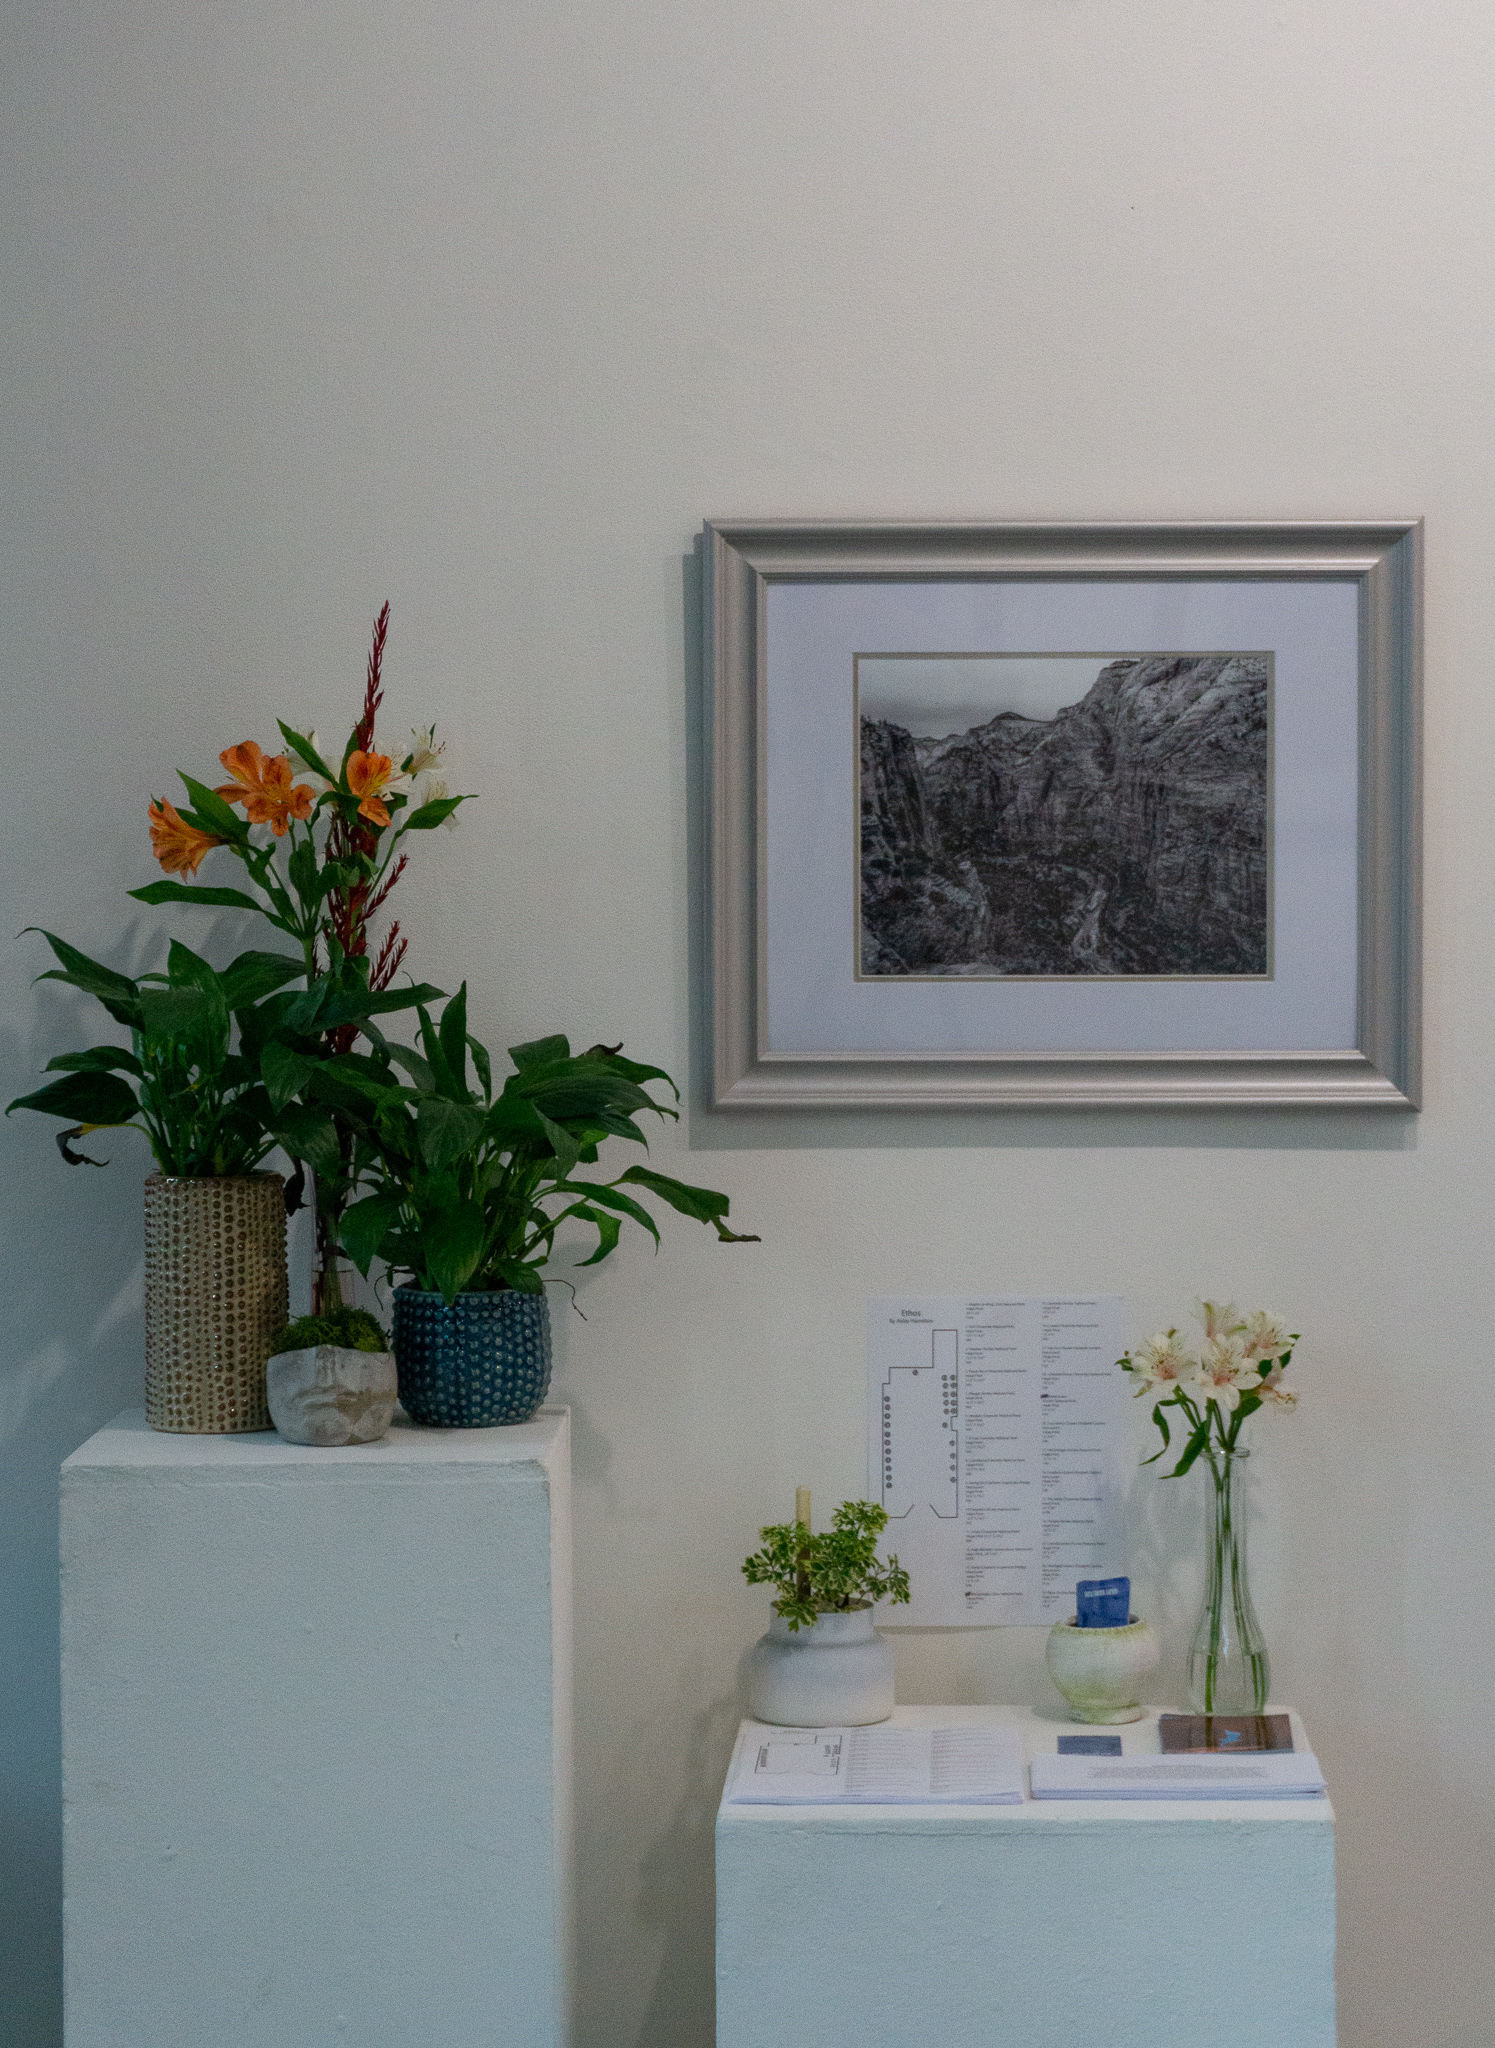 A framed black and white photograph above houseplants